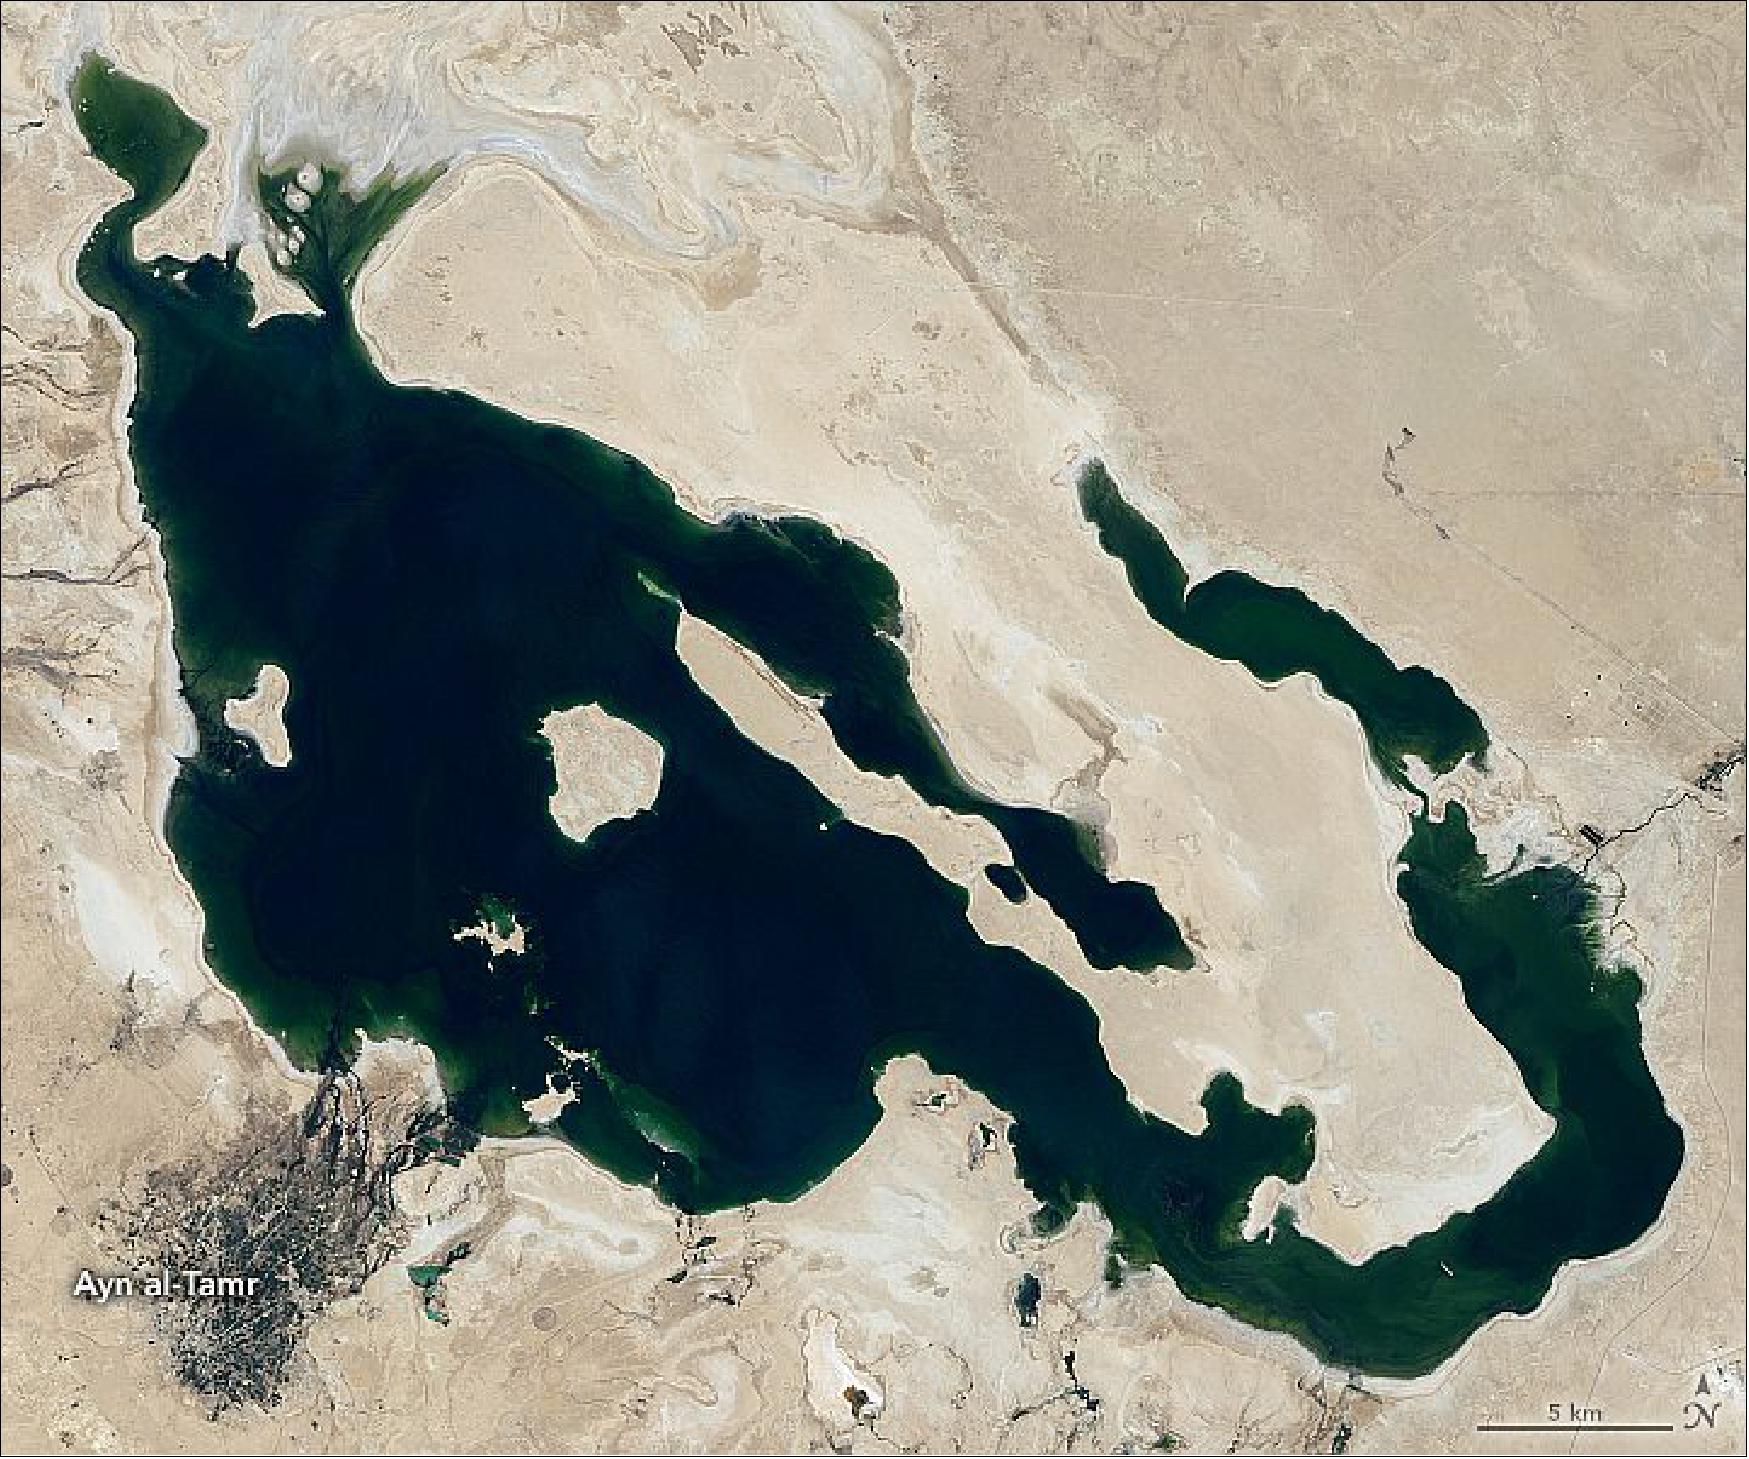 Figure 33: Image of Lake Milh acquired with the Landsat-8 OLI instrument on 21 August 2020 (image credit: NASA Earth Observatory)